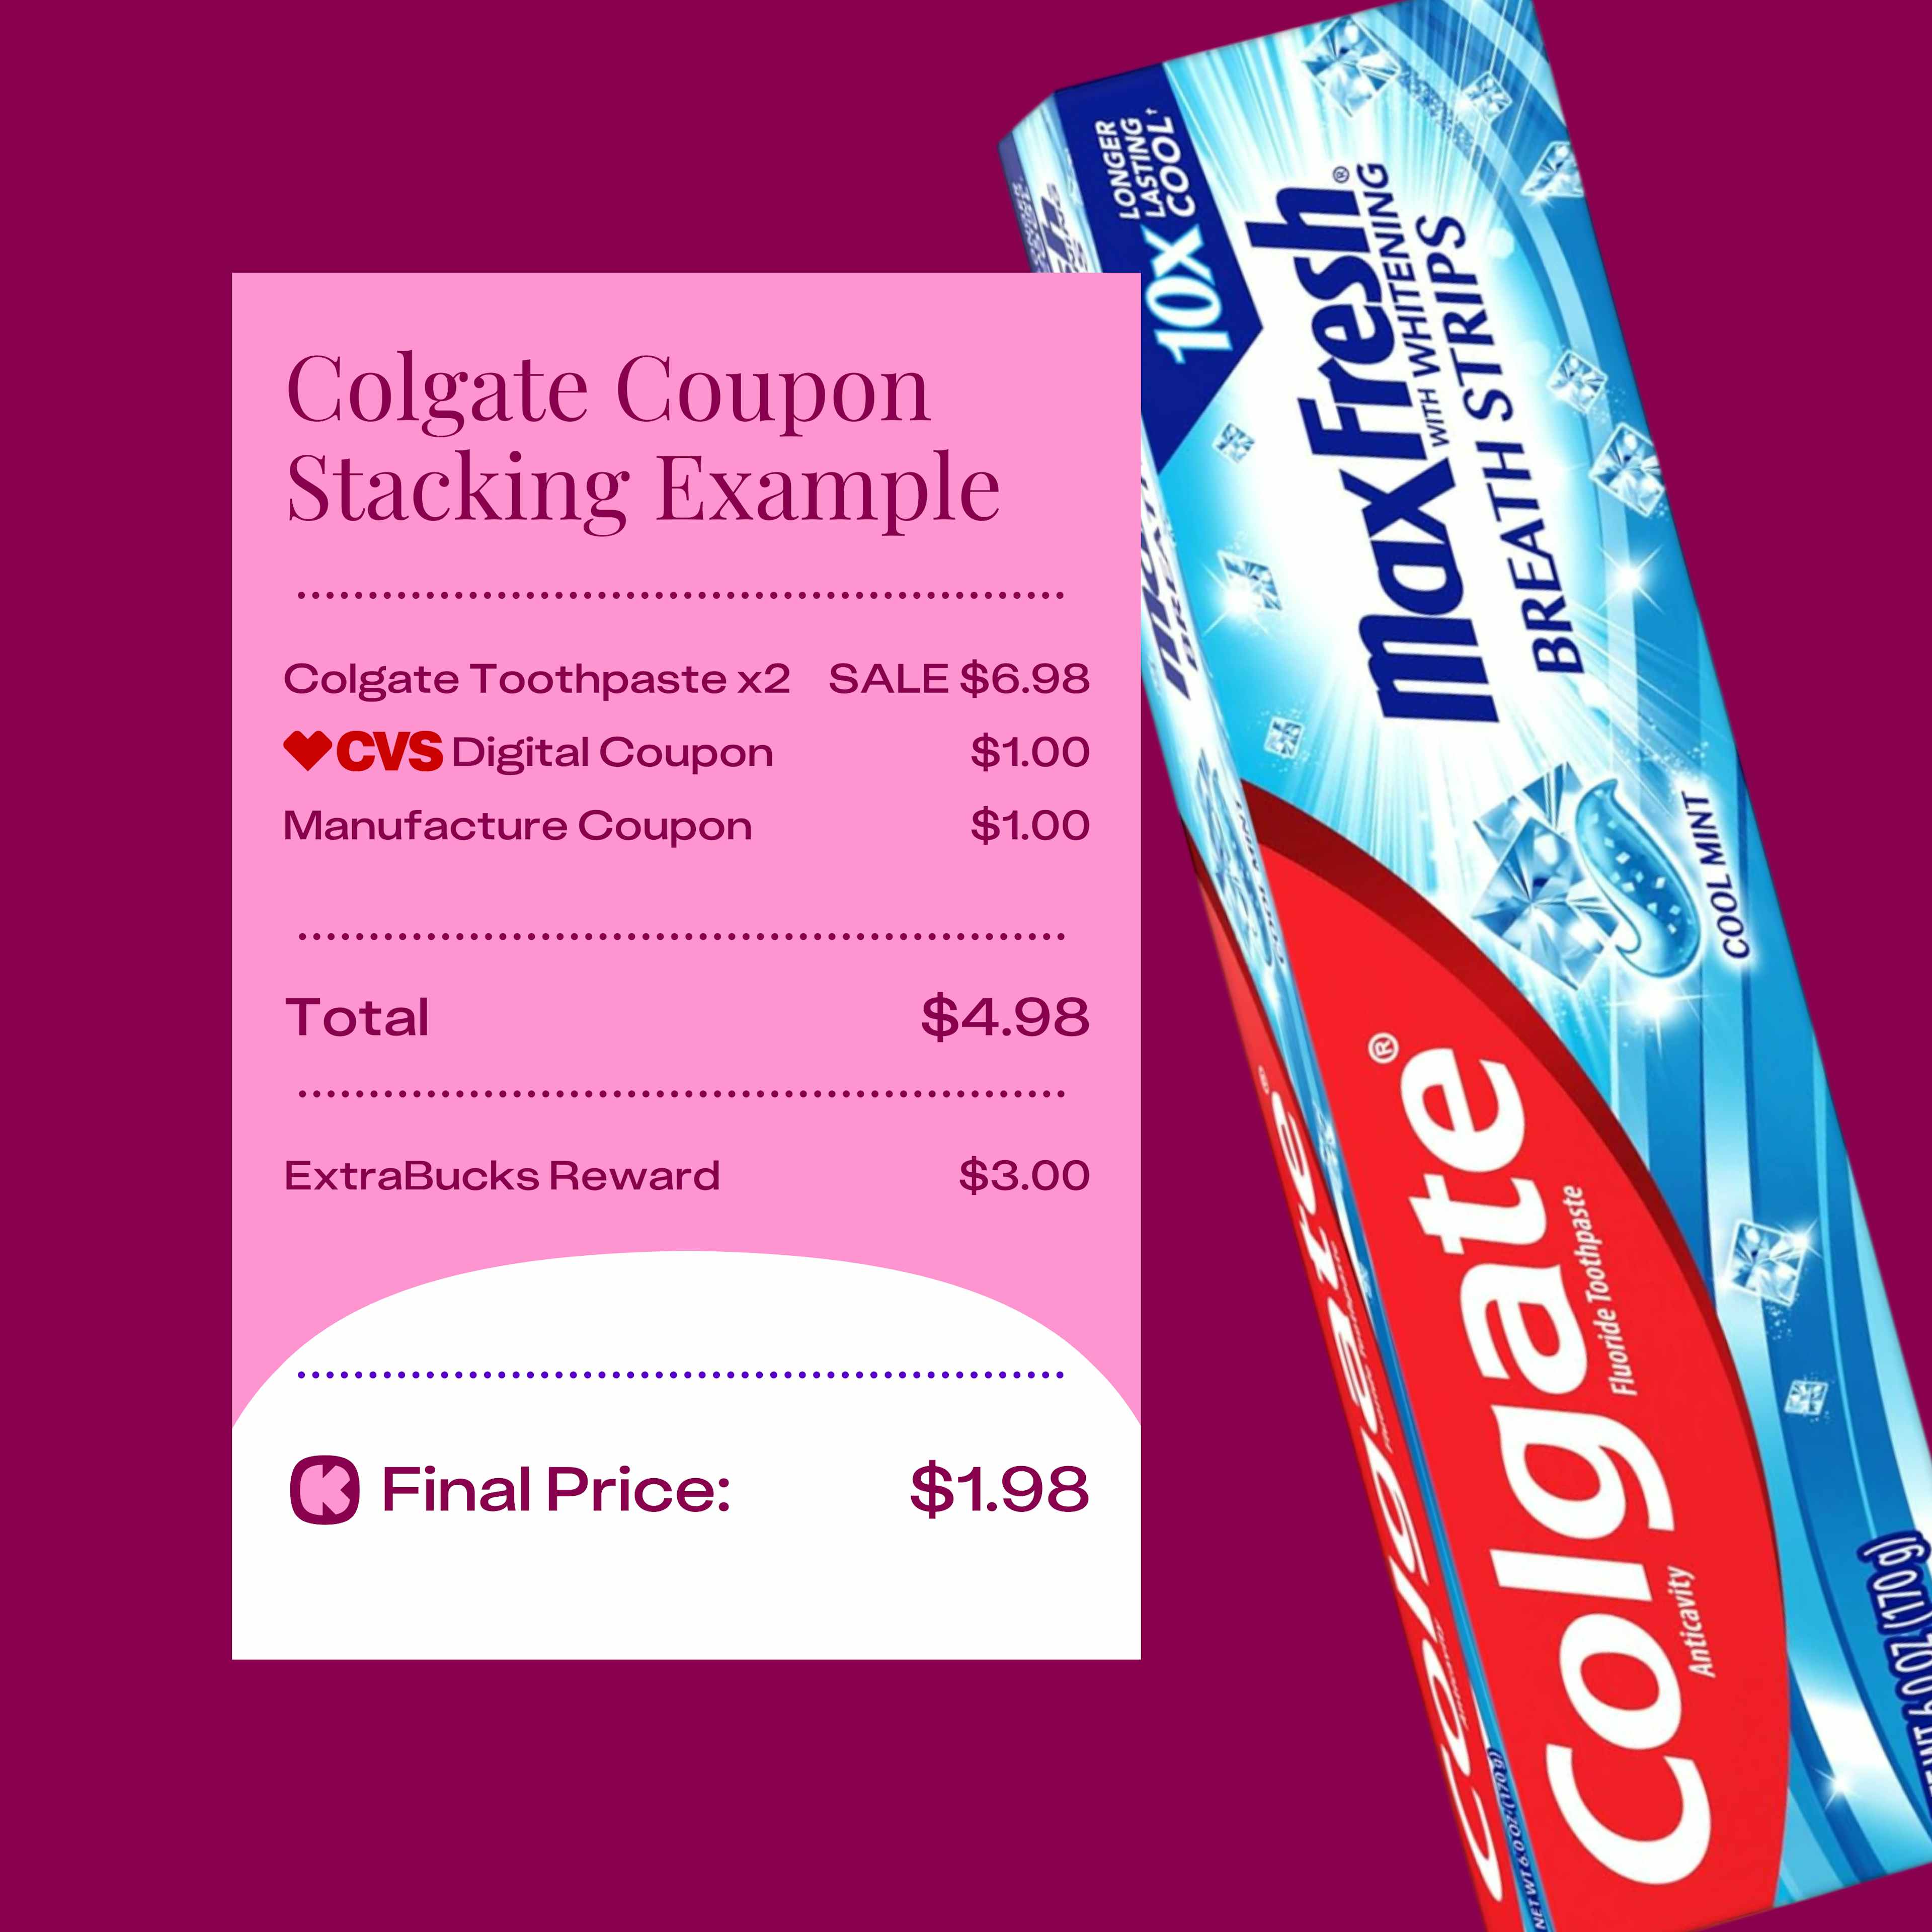 Colgate coupon stacking example at CVS, where you combine a digital coupon with a manufacturer coupon to earn ExtraBucks.